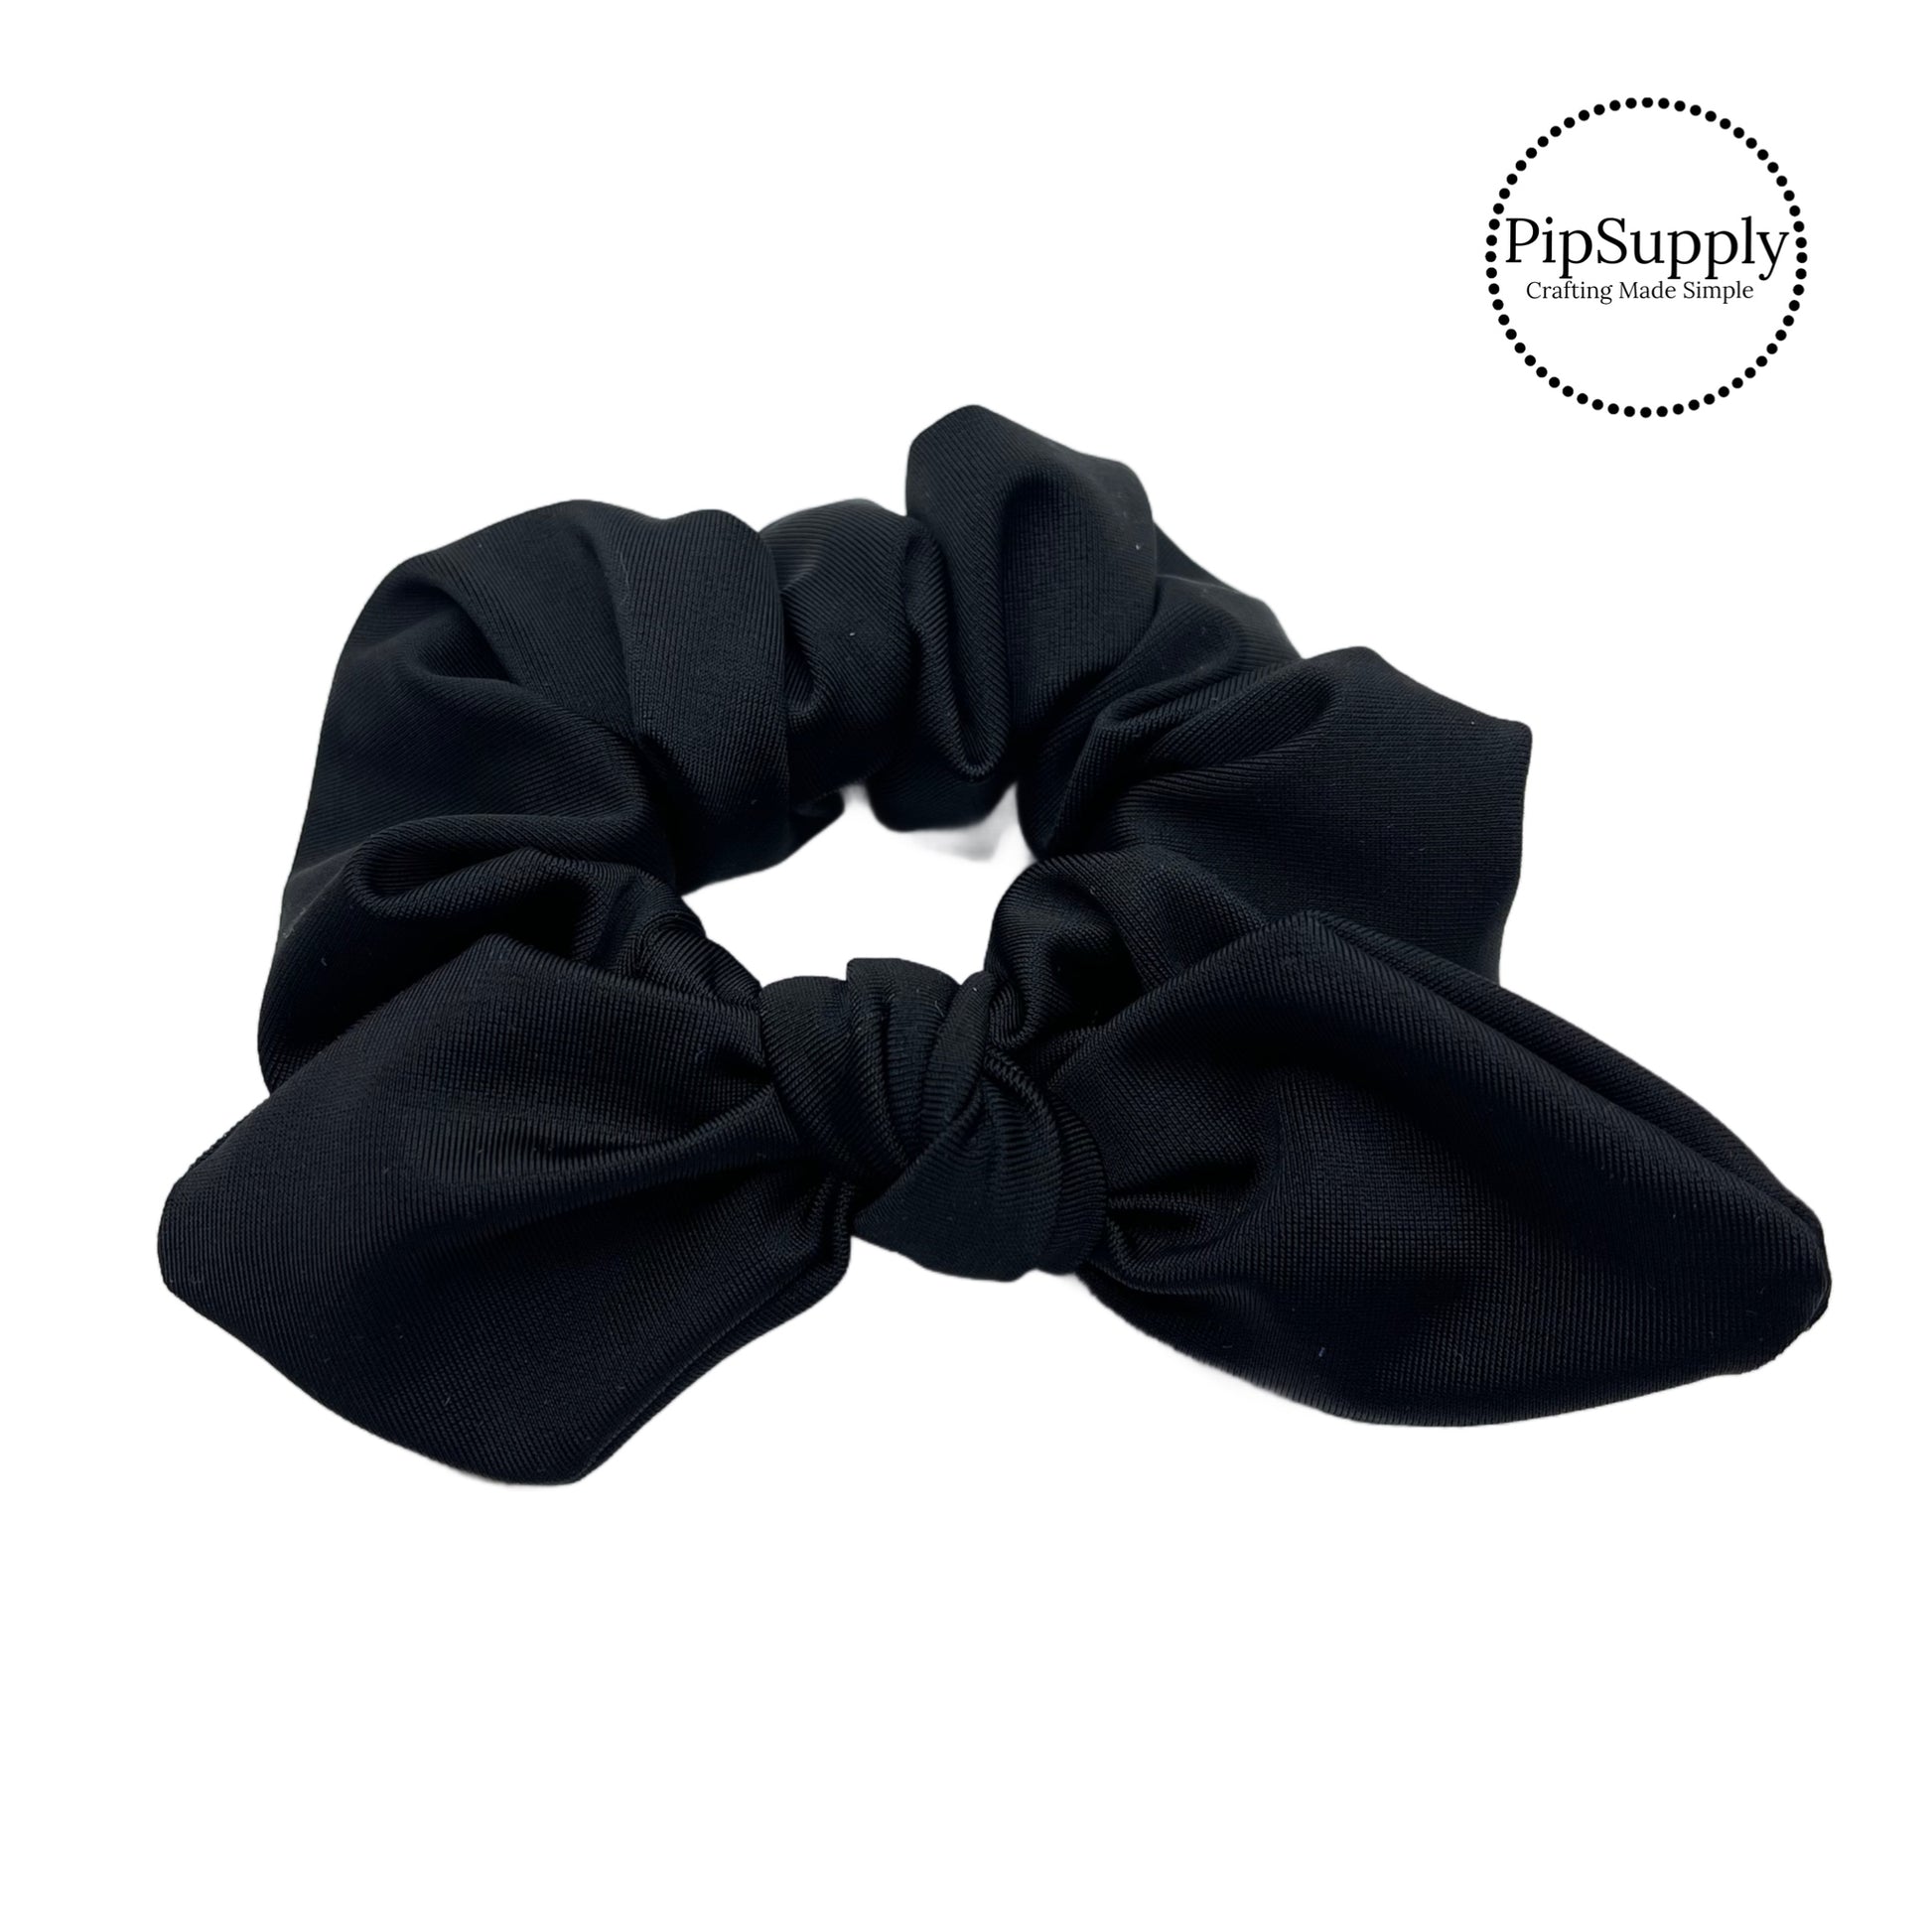 These black swim scrunchies have a two layer swimsuit fabric strip with edges that are securely folded and sewn providing a professional and high quality seam. Fabric is thick high quality not coarse or stiff with elastic band sewn inside for stretch-ability. Pattern visible on all sides. Bow comes pre-tied on scrunchie however is removable to be available as separate bow.